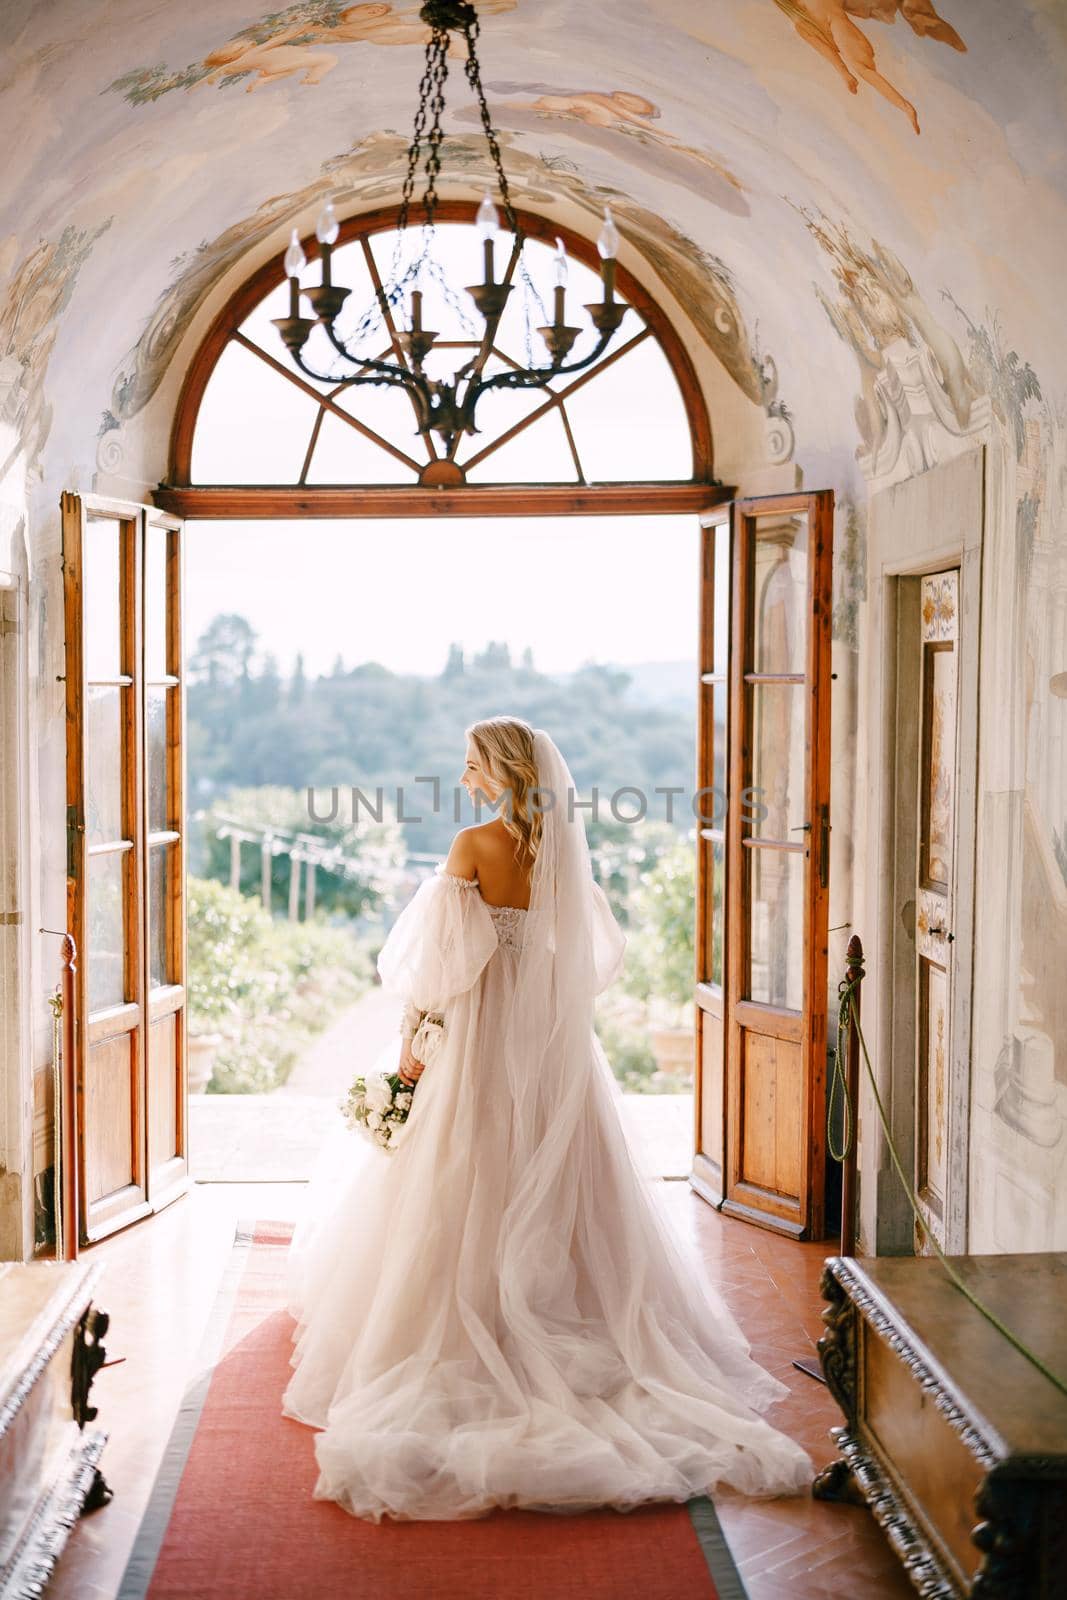 Wedding at an old winery villa in Tuscany, Italy. The bride walks in the interior of the villa, overlooking the garden. by Nadtochiy